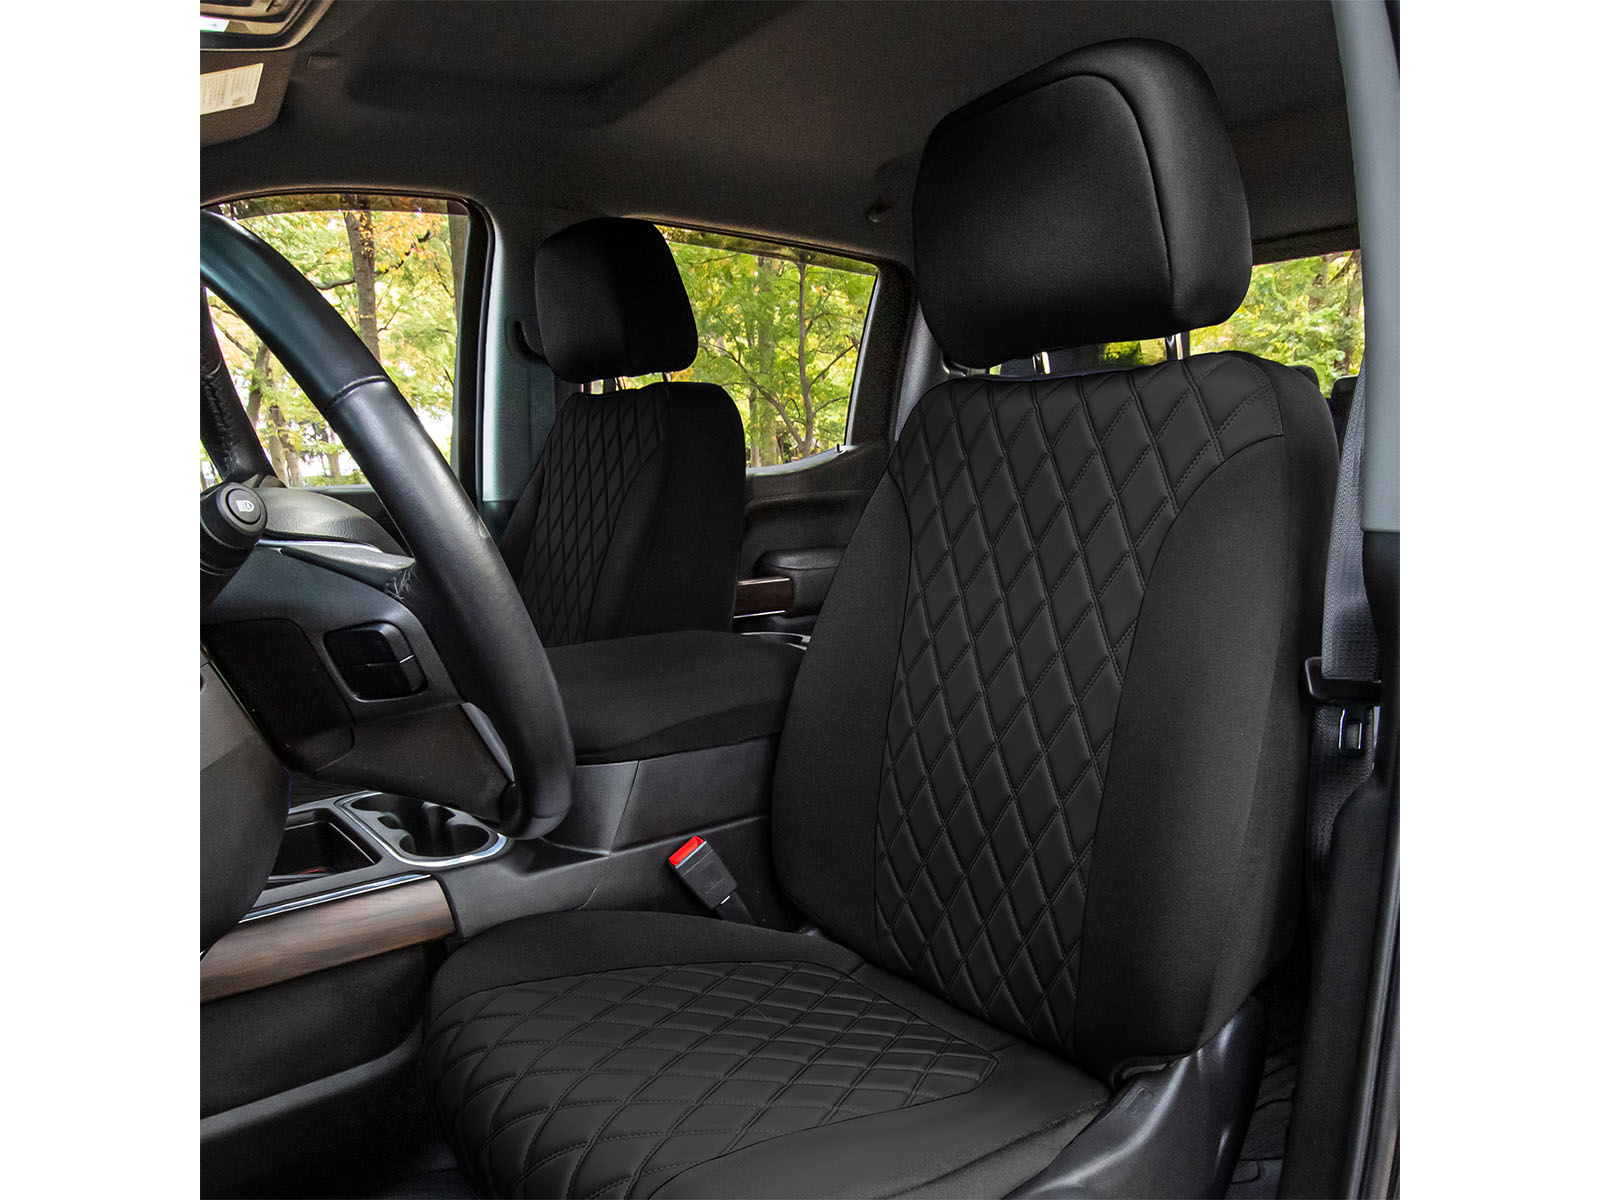 Ford Explorer Seat Covers RealTruck